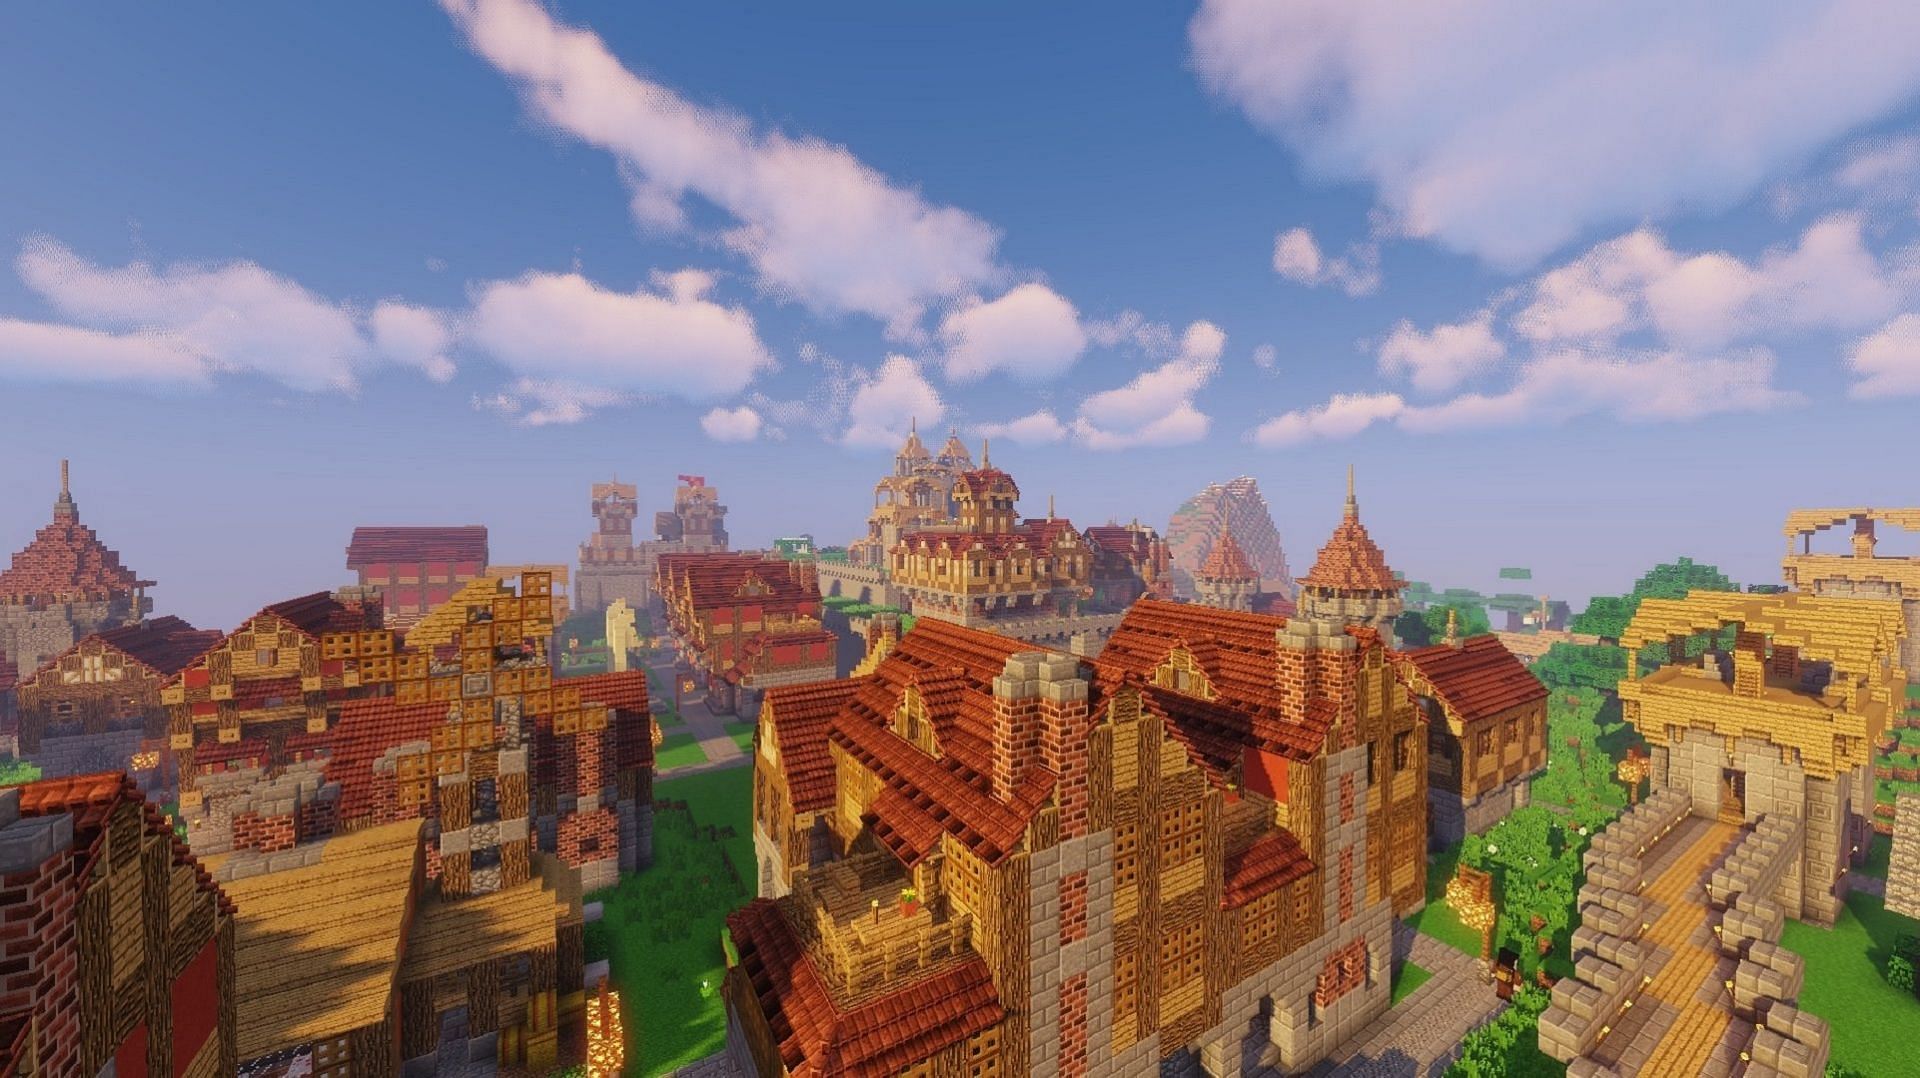 A splendorous Minecraft town created in MineColonies (Image via H3lay/CurseForge)